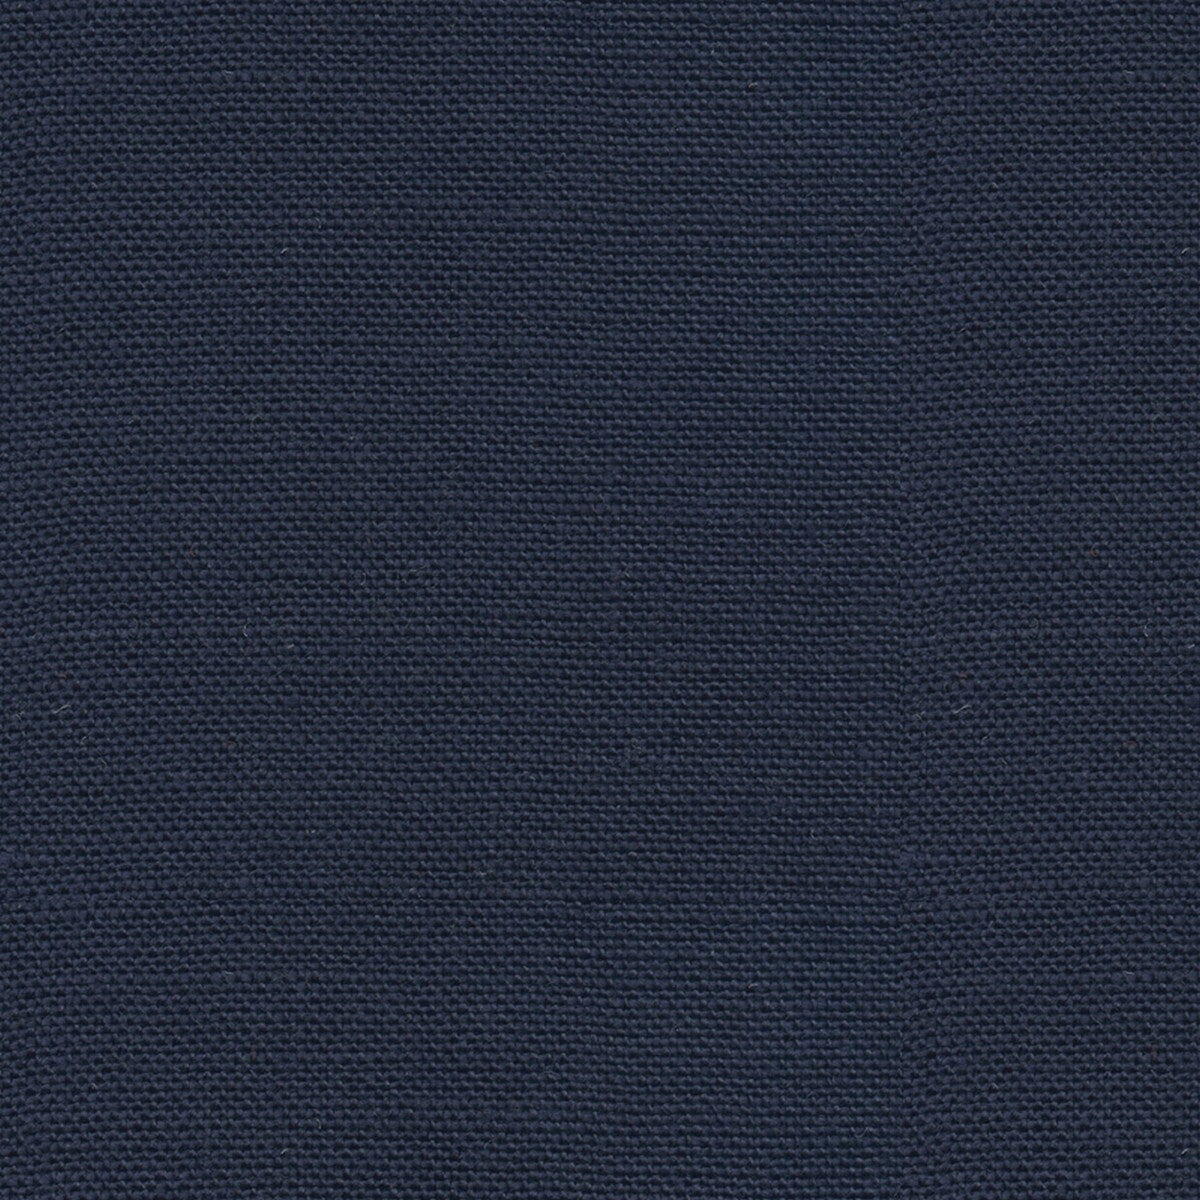 Newport fabric in indigo color - pattern ED85116.680.0 - by Threads in the Variation collection